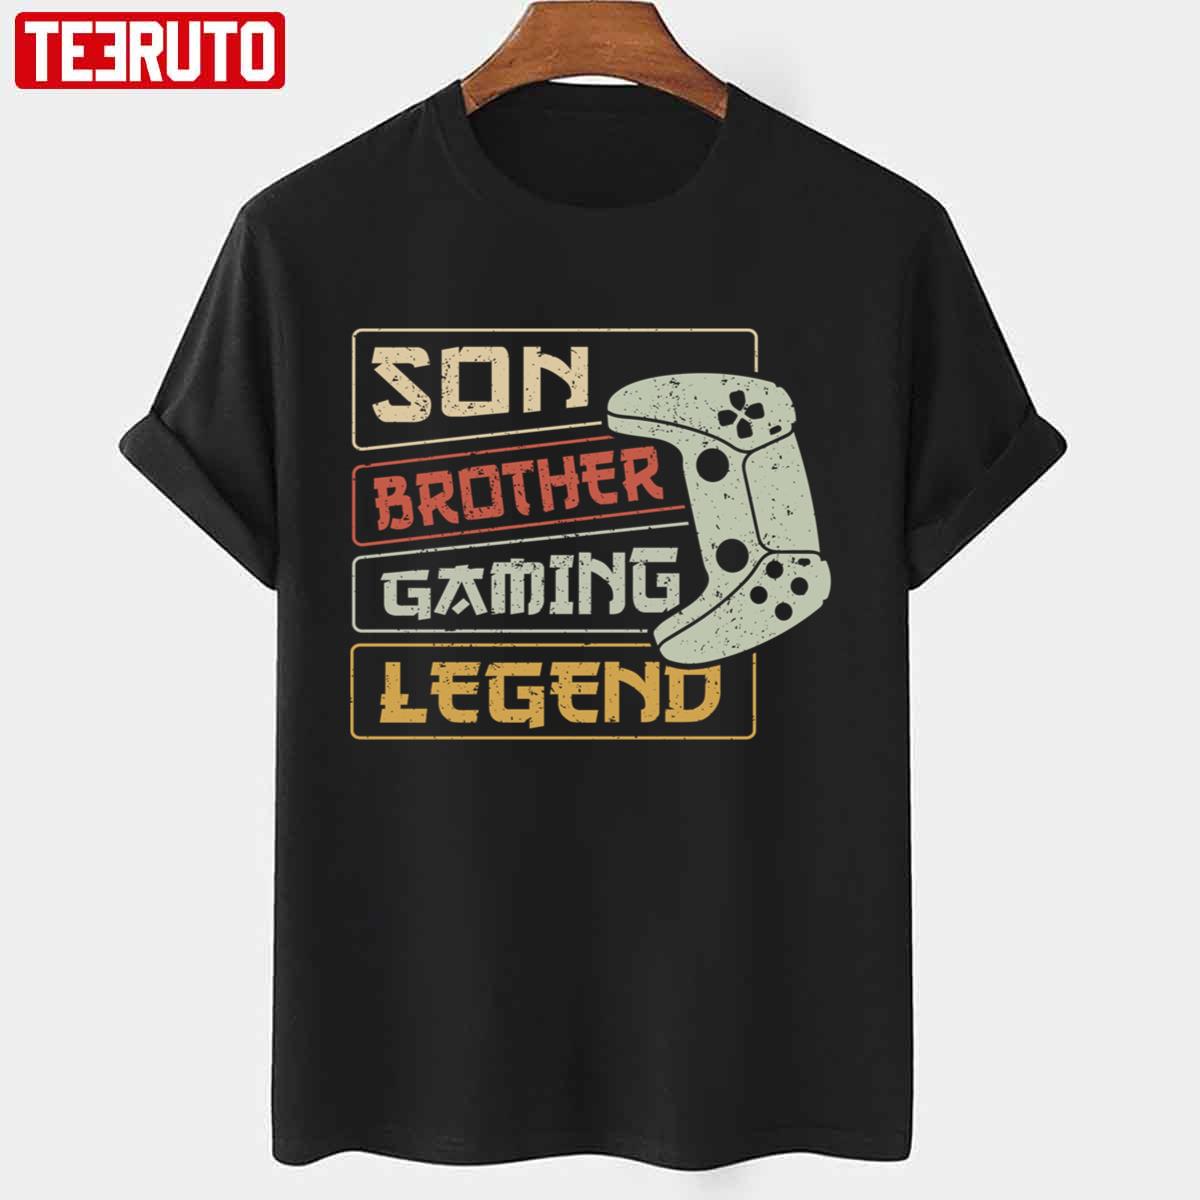 Funny Son Brother Gaming Legend Gift For Gamers And For Gaming Lovers Unisex T-Shirt